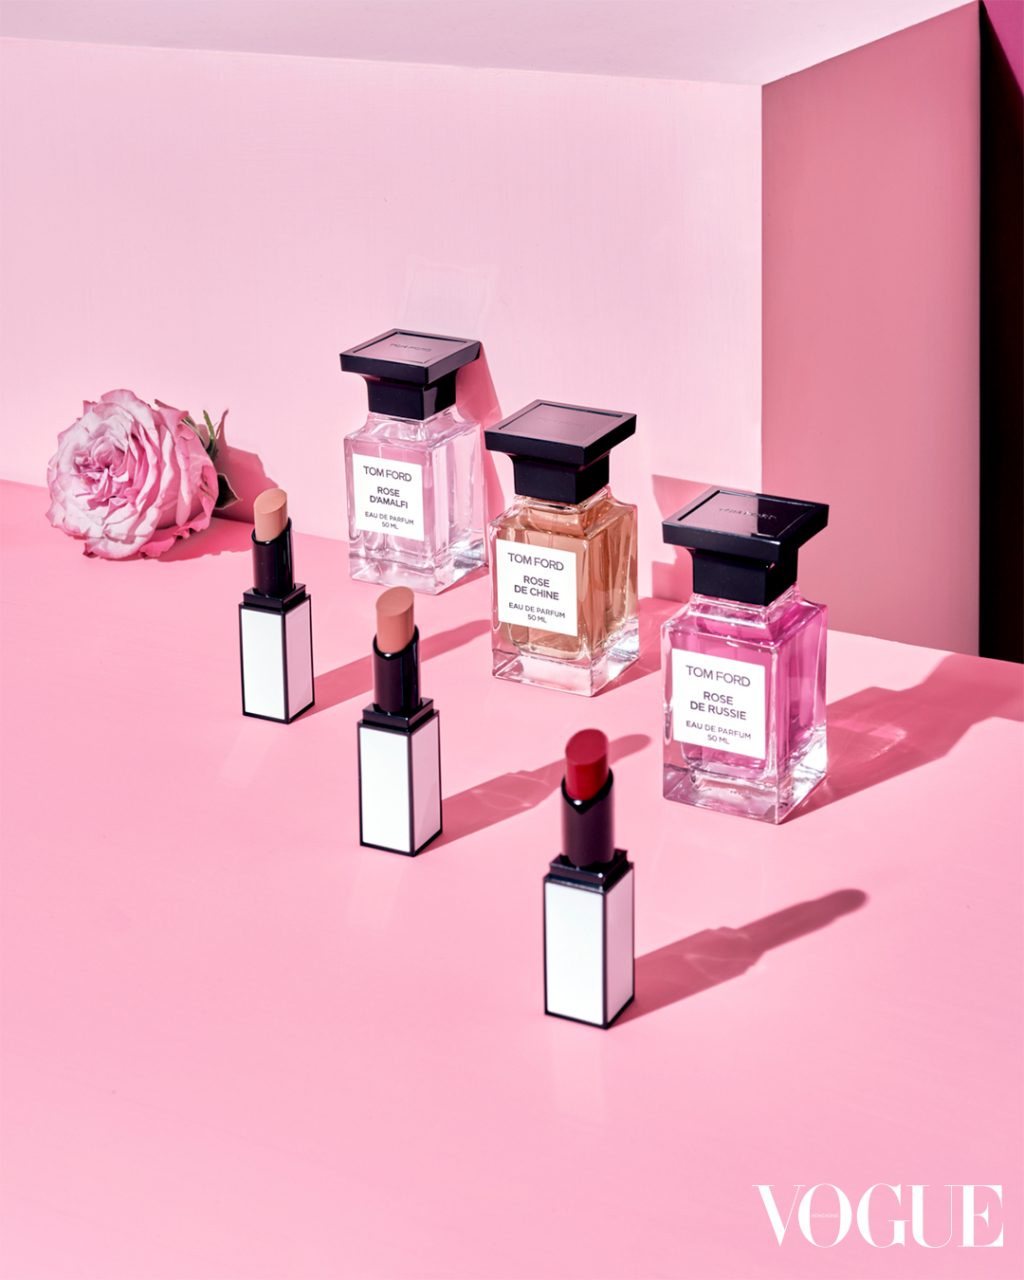 Tom Ford Private Rose Garden: The Trilogy